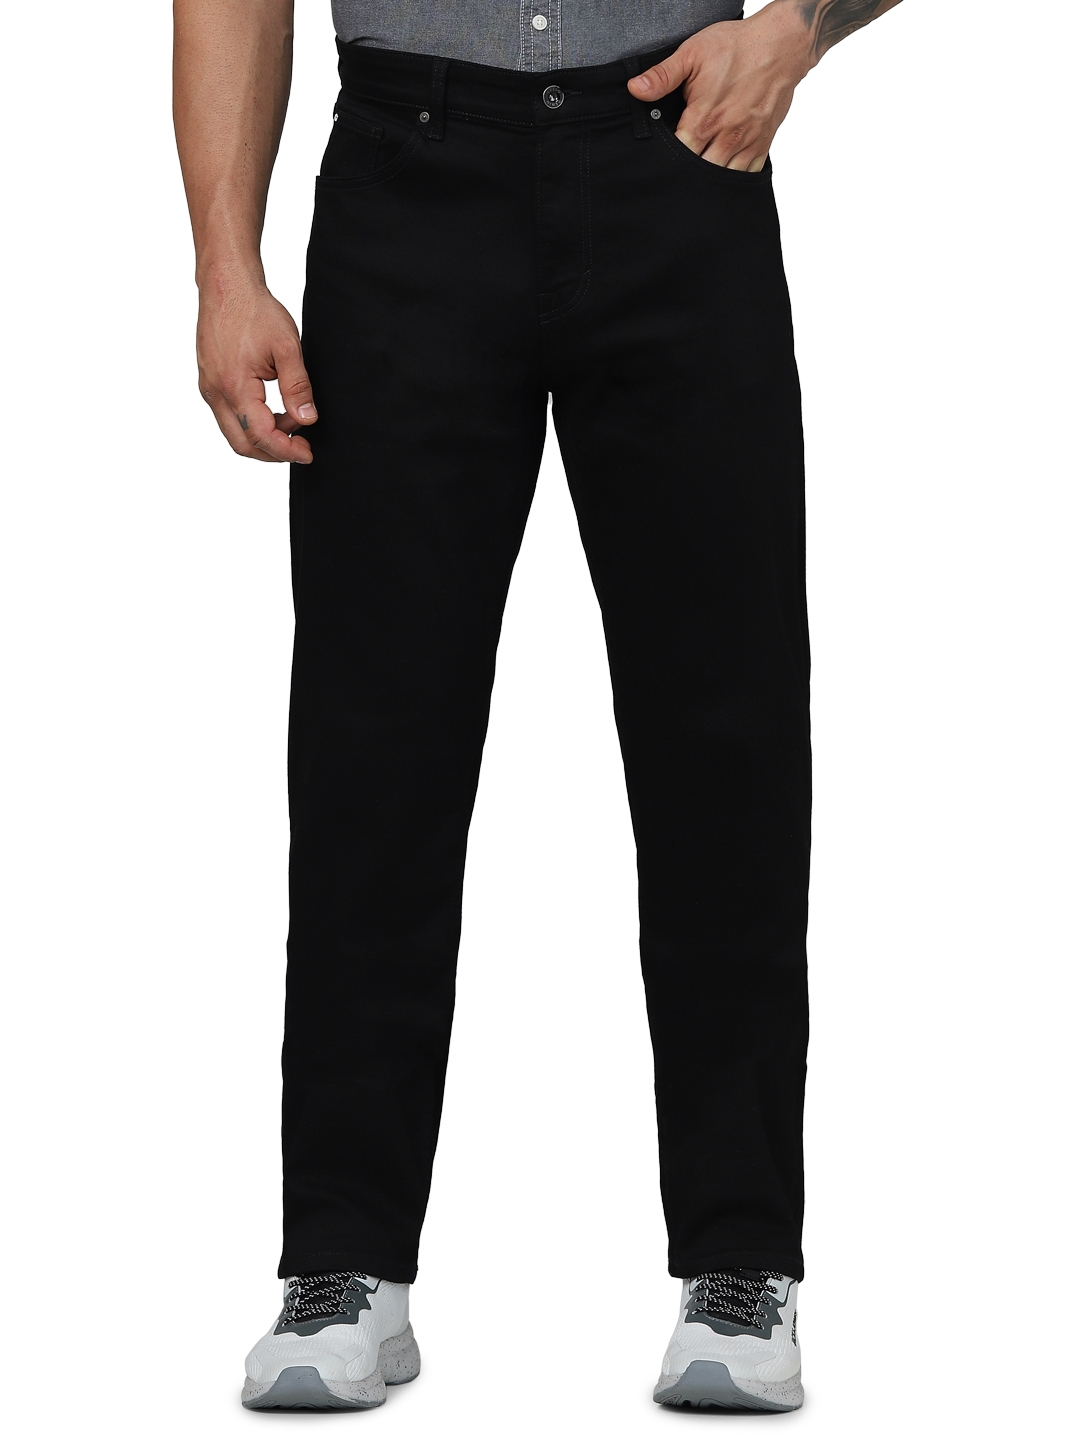 Celio Men Black Solid Straight Fit Cotton Twill Denim and Stay Black Jeans